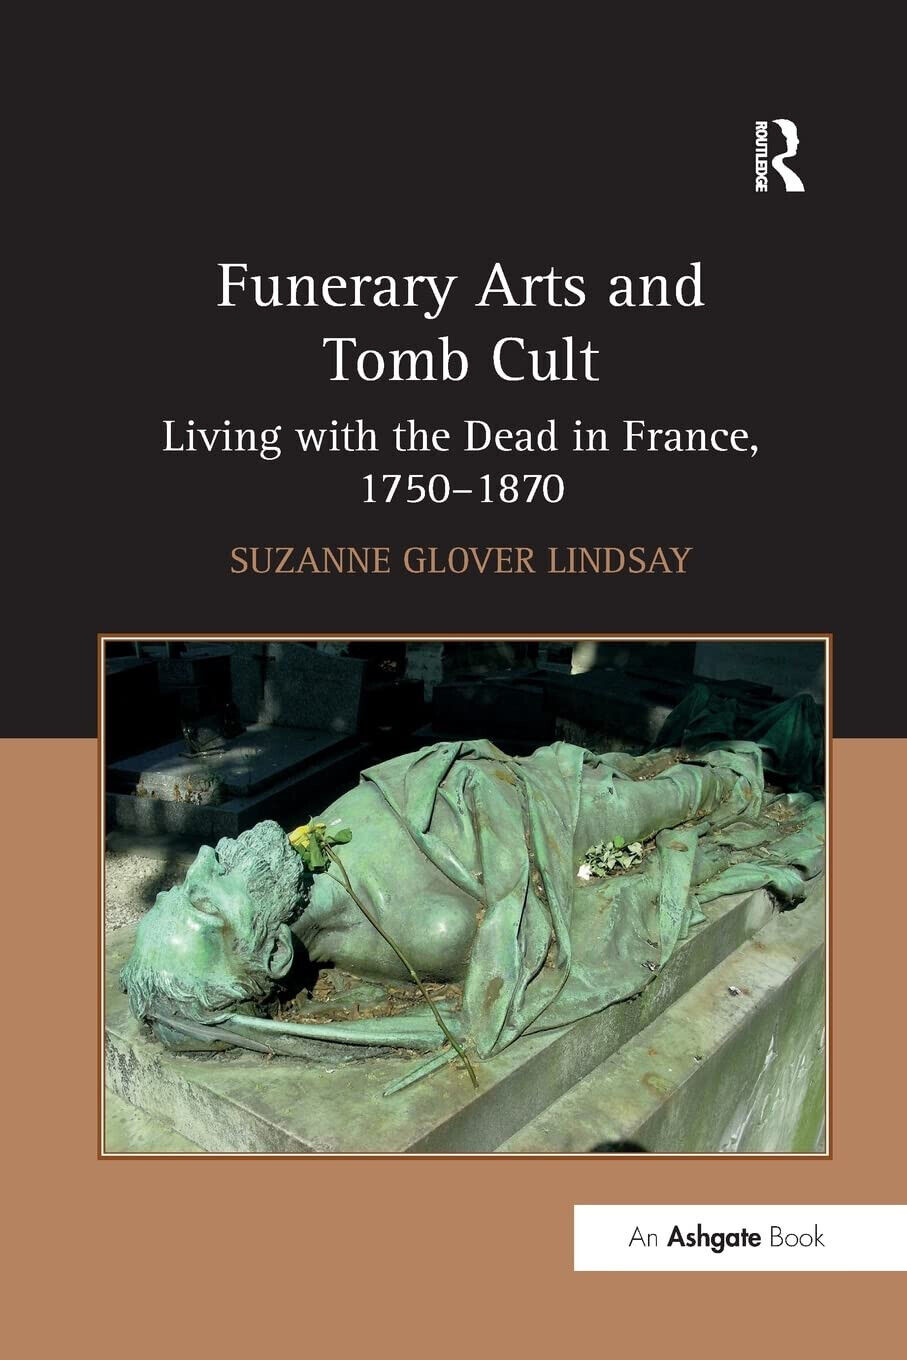 Funerary Arts and Tomb Cult - Suzanne Glover Lindsay - Routledge, 2016